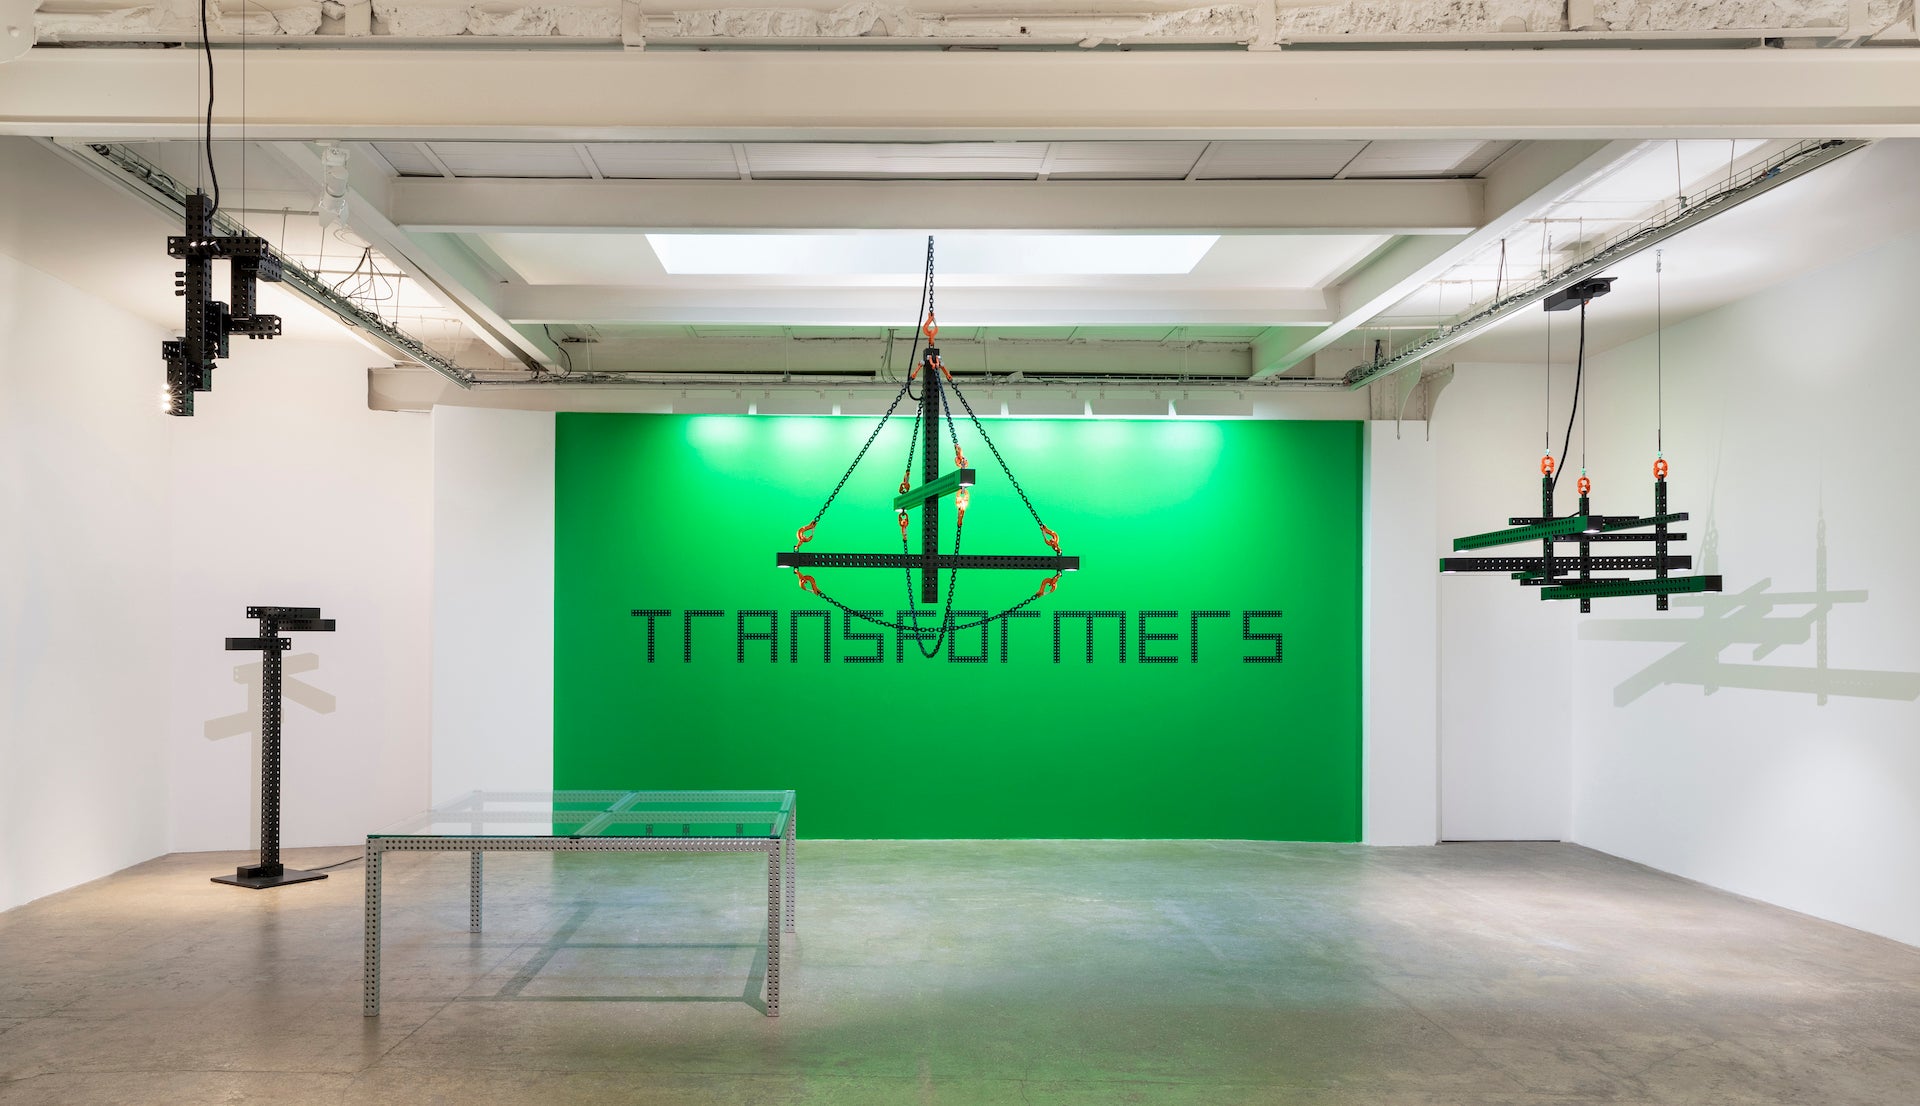 The current TRANSFORMERS exhibition featuring new work by Konstantin Grcic. Photo © Alexandra de Cossette; Courtesy of Galerie kreo